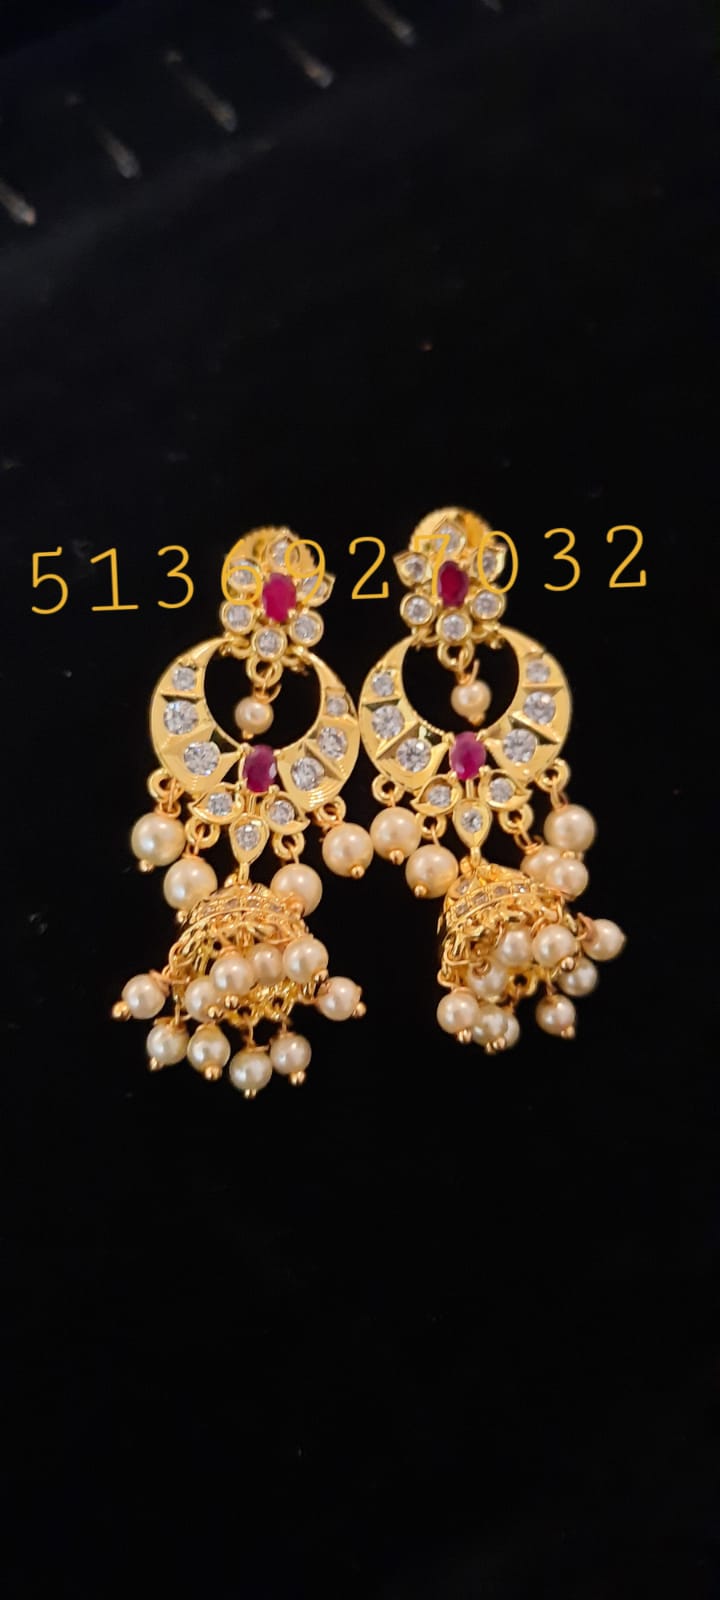 Flipkart.com - Buy Happy Stoning One Gram Gold Plated South Indian Style  Earrings (Screw Back) Beads Brass Jhumki Earring Online at Best Prices in  India